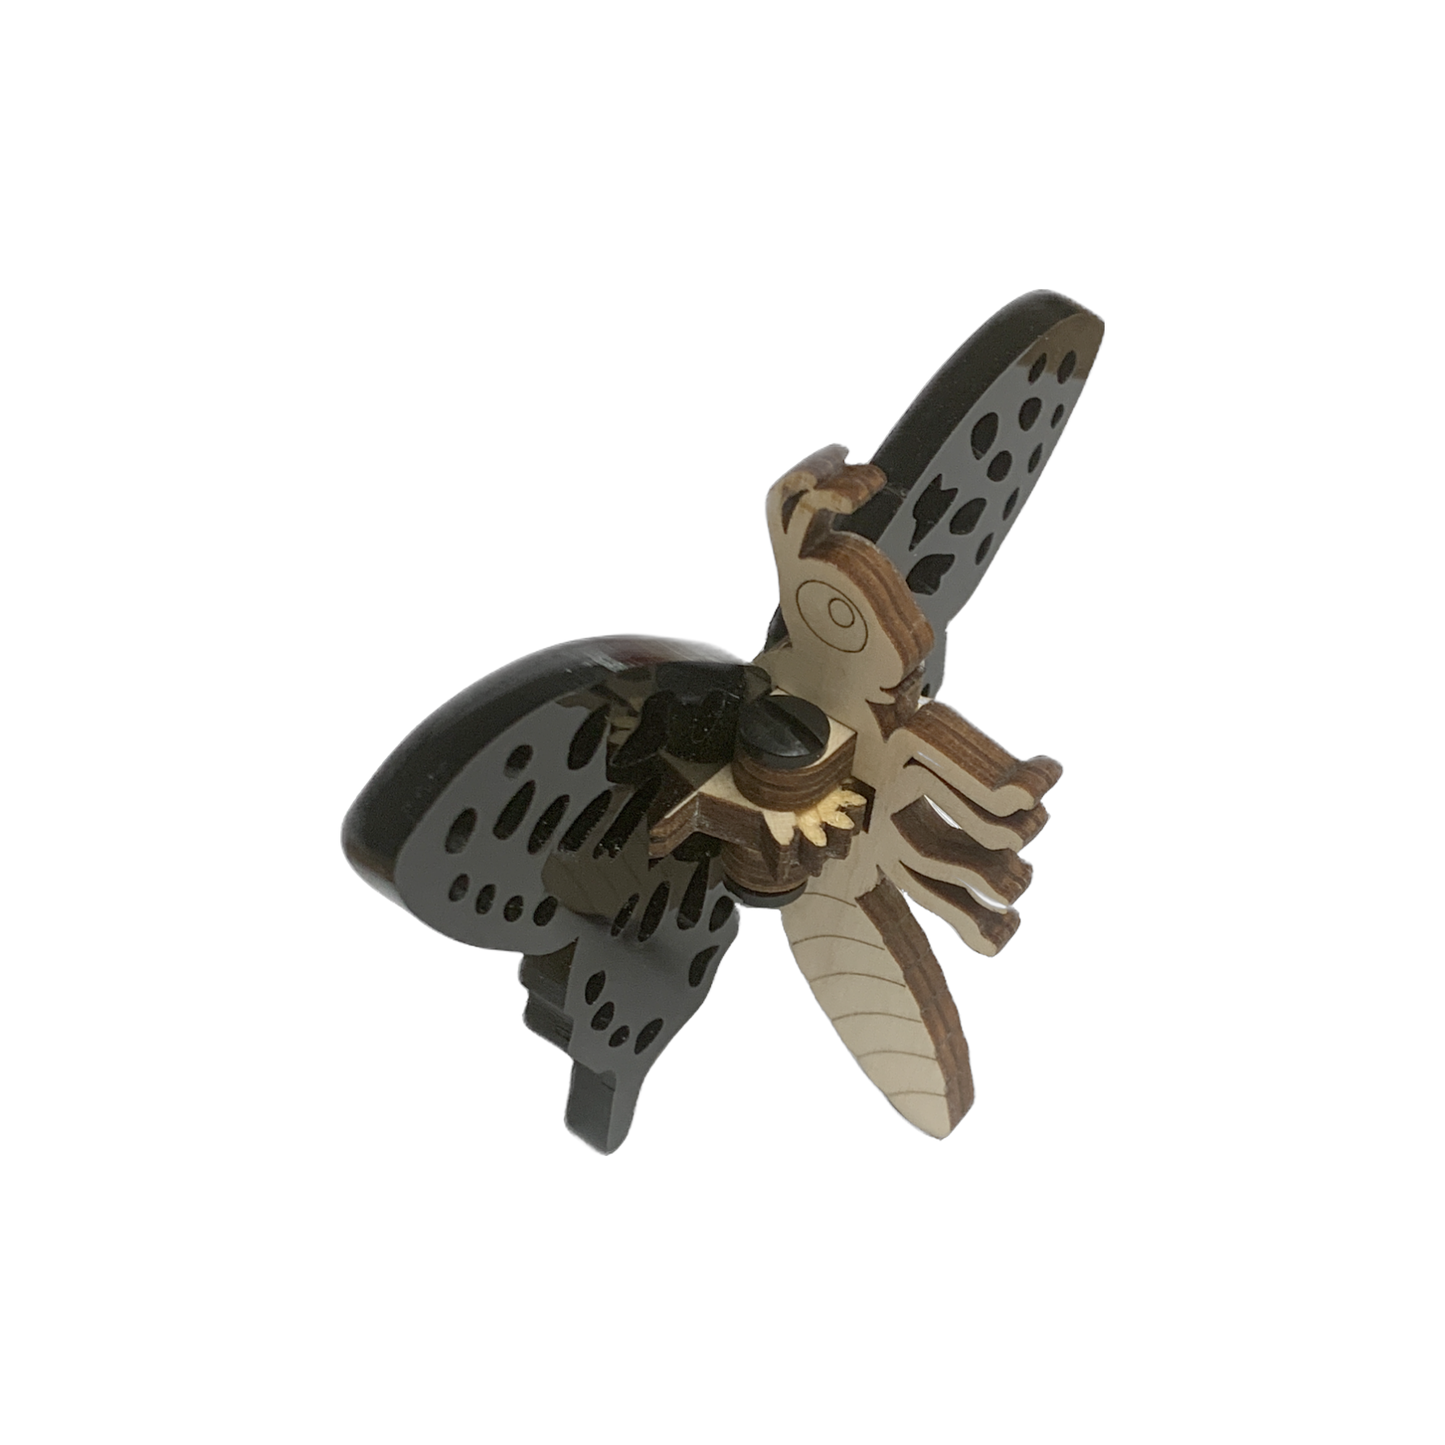 Wooden 3D Puzzle Toy - Insects: Firefly